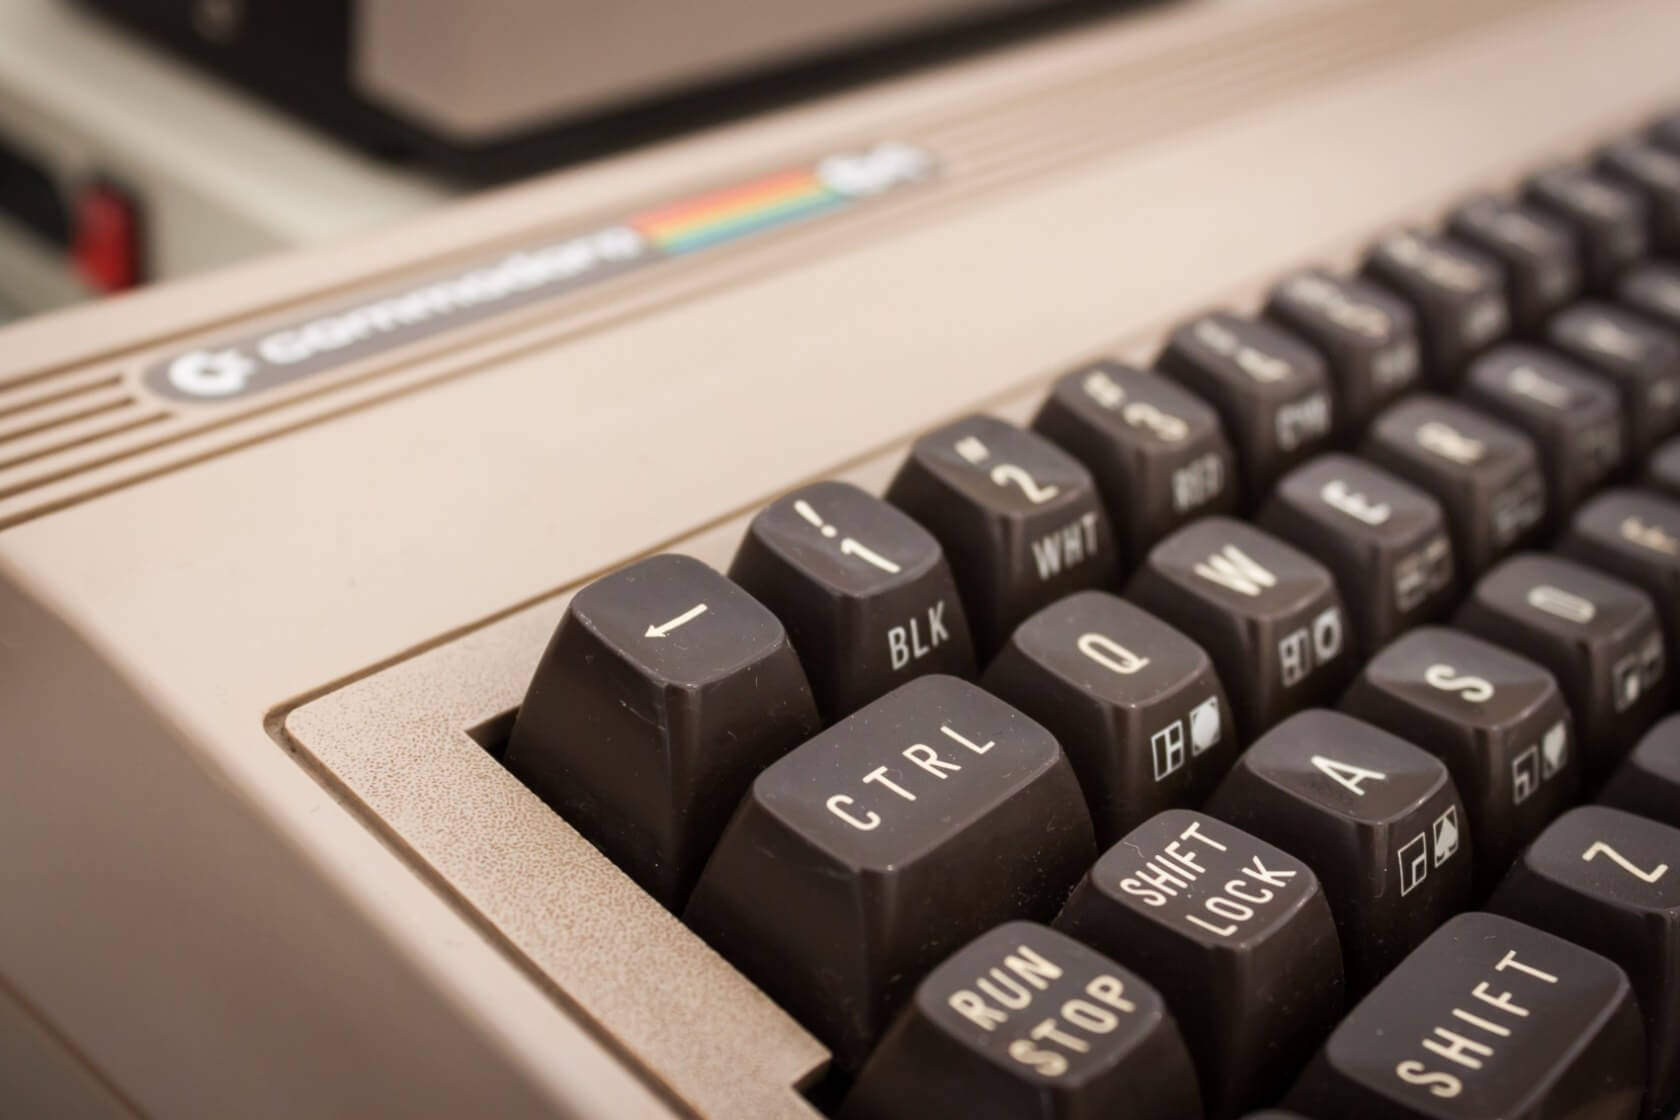 The Internet Archive just got a working Commodore 64 Emulator